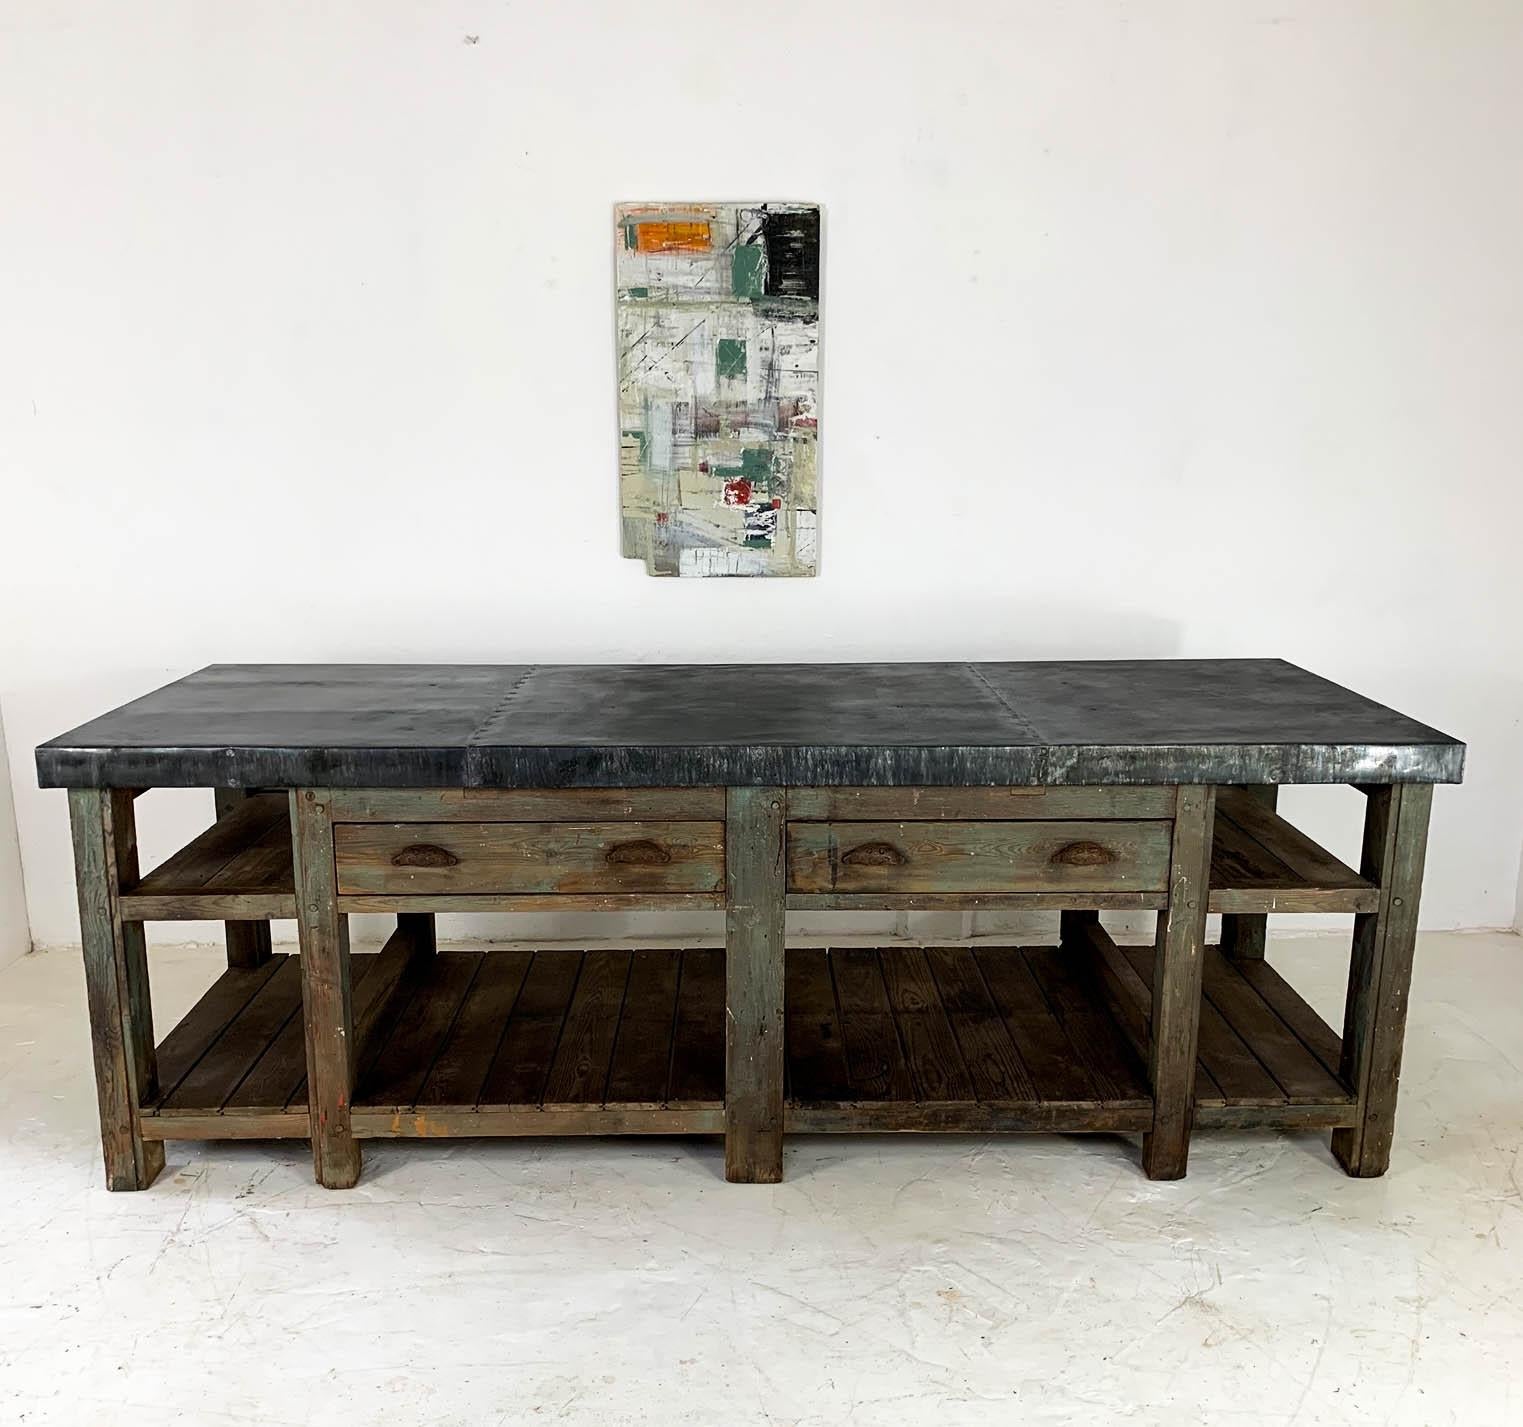 Fantastic, fully restored carpenter's workbench from the North of England. We have added a beautifully aged zinc top, which resembles grey slate in colour, to the greenish pine and oak base. Zinc is a very practical and hygienic material to use in